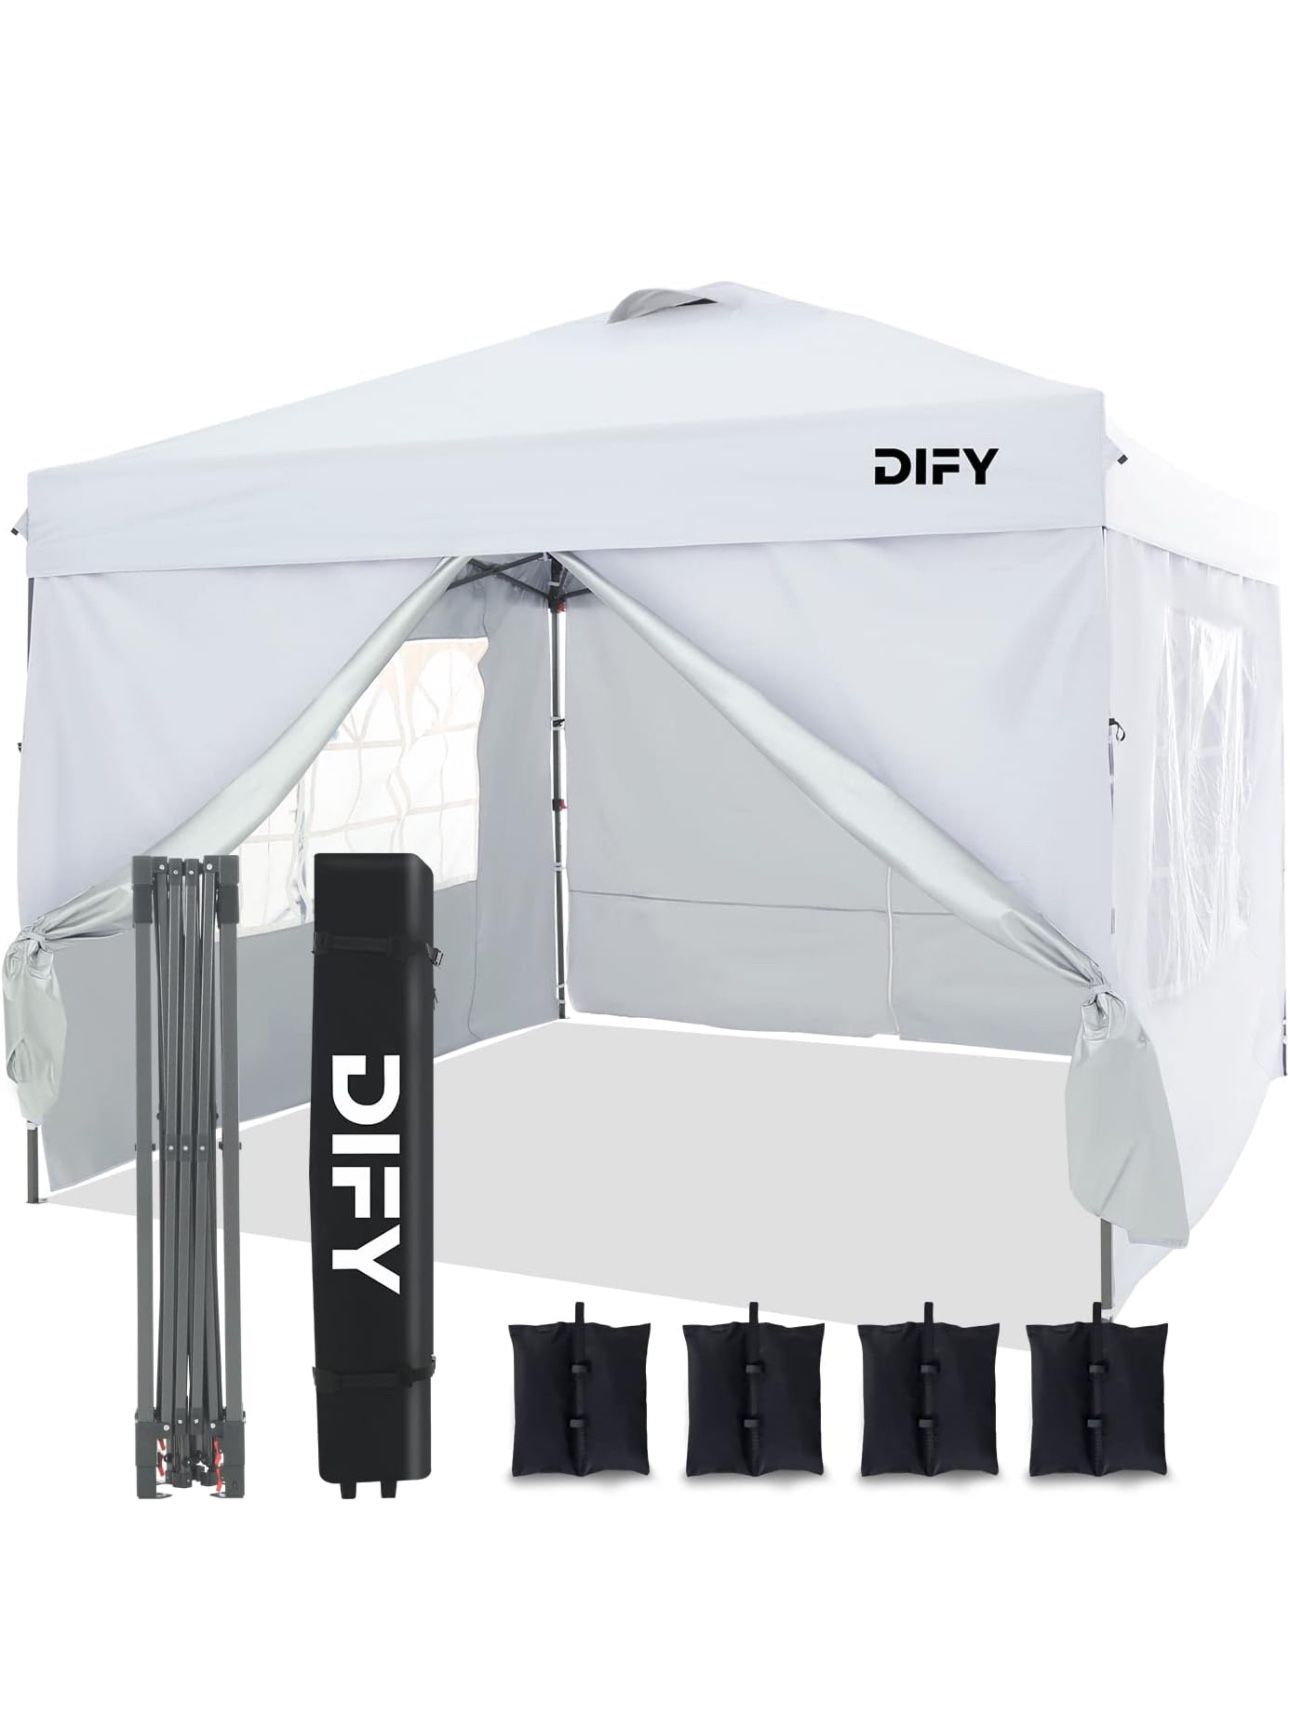 10x10 Durable EZ Pop Up Canopy with 4 Removable Sidewalls, 4 Sandbags. Outdoor Canopy Tent with Roller Bag, Patio Outdoor Canopy for Commerce, Beach, 